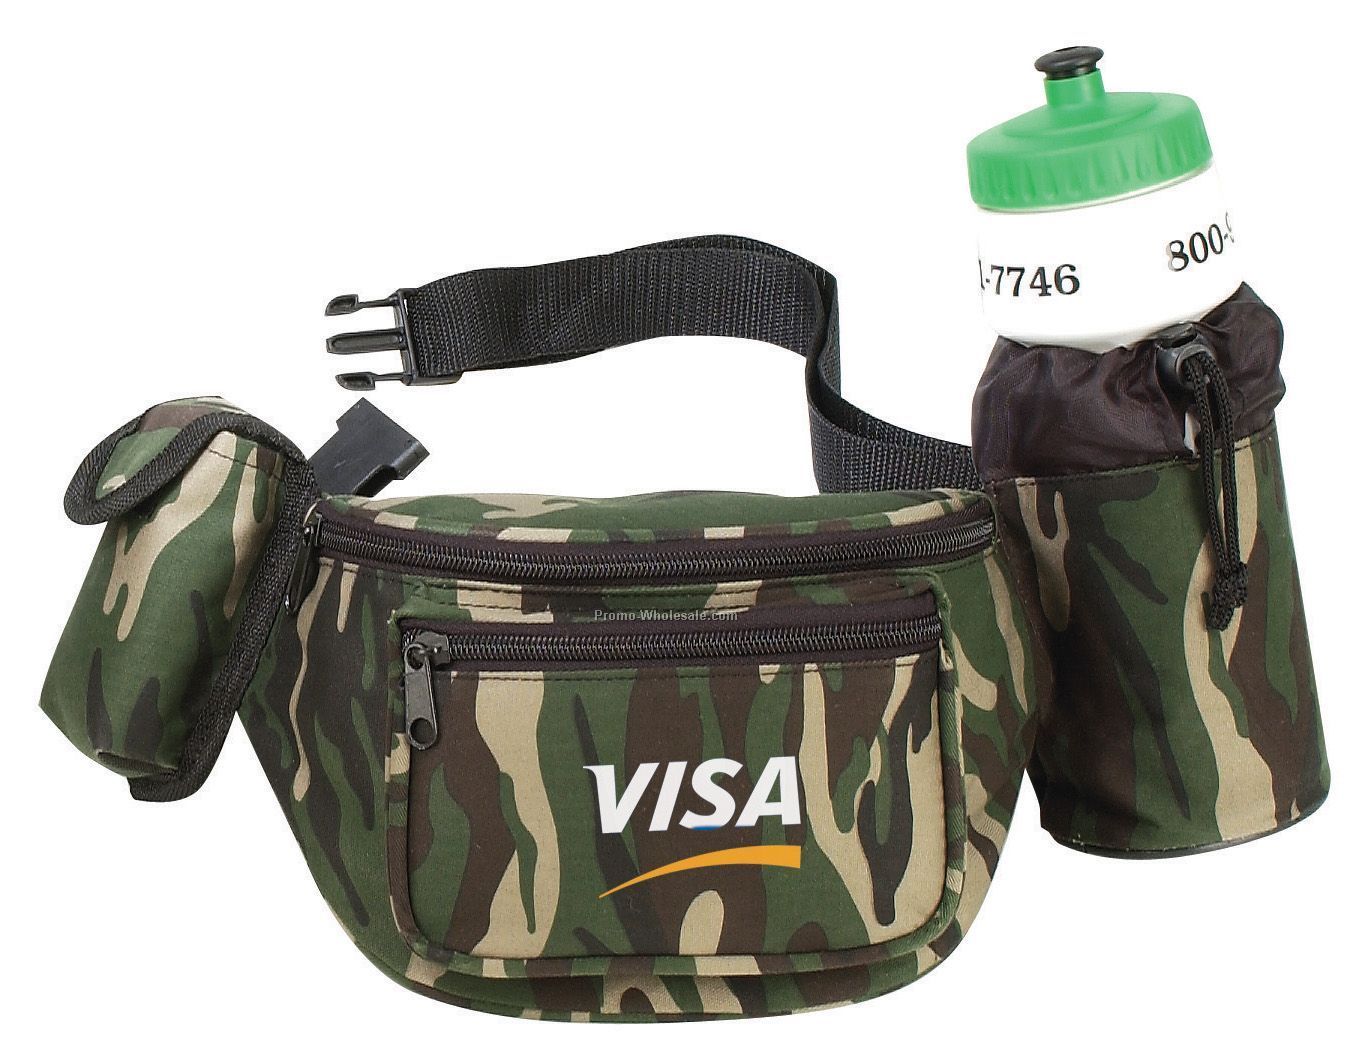 Poly Fanny Pack With Bottle Holder And Cell Phone Pouch